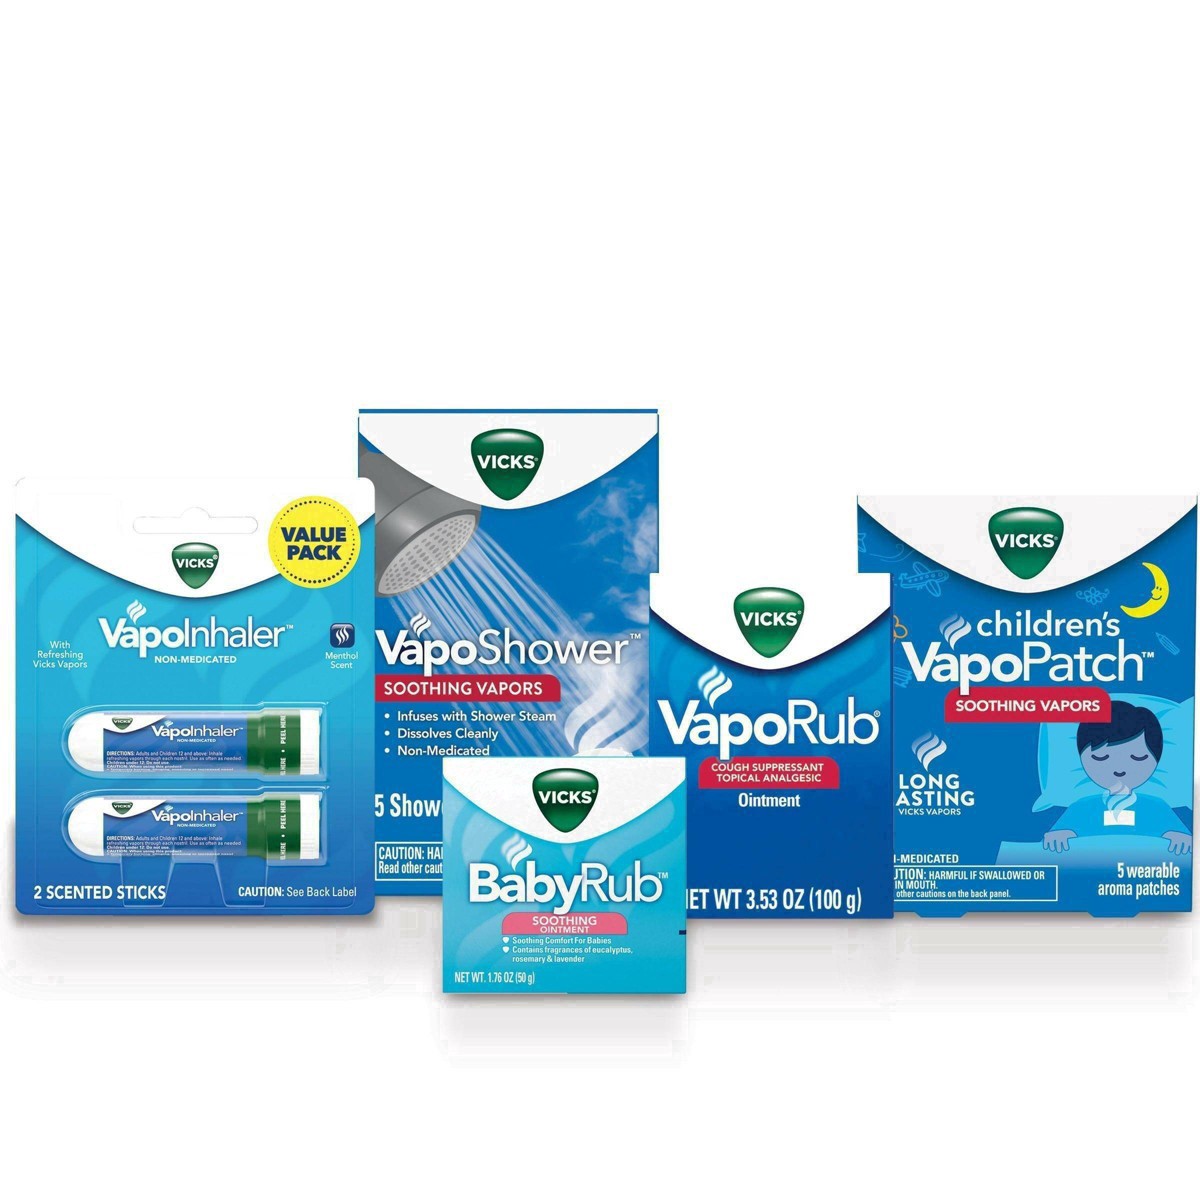 slide 17 of 37, Vicks Children's VapoPatch with Long Lasting Soothing Vapors - Menthol - 5ct, 5 ct